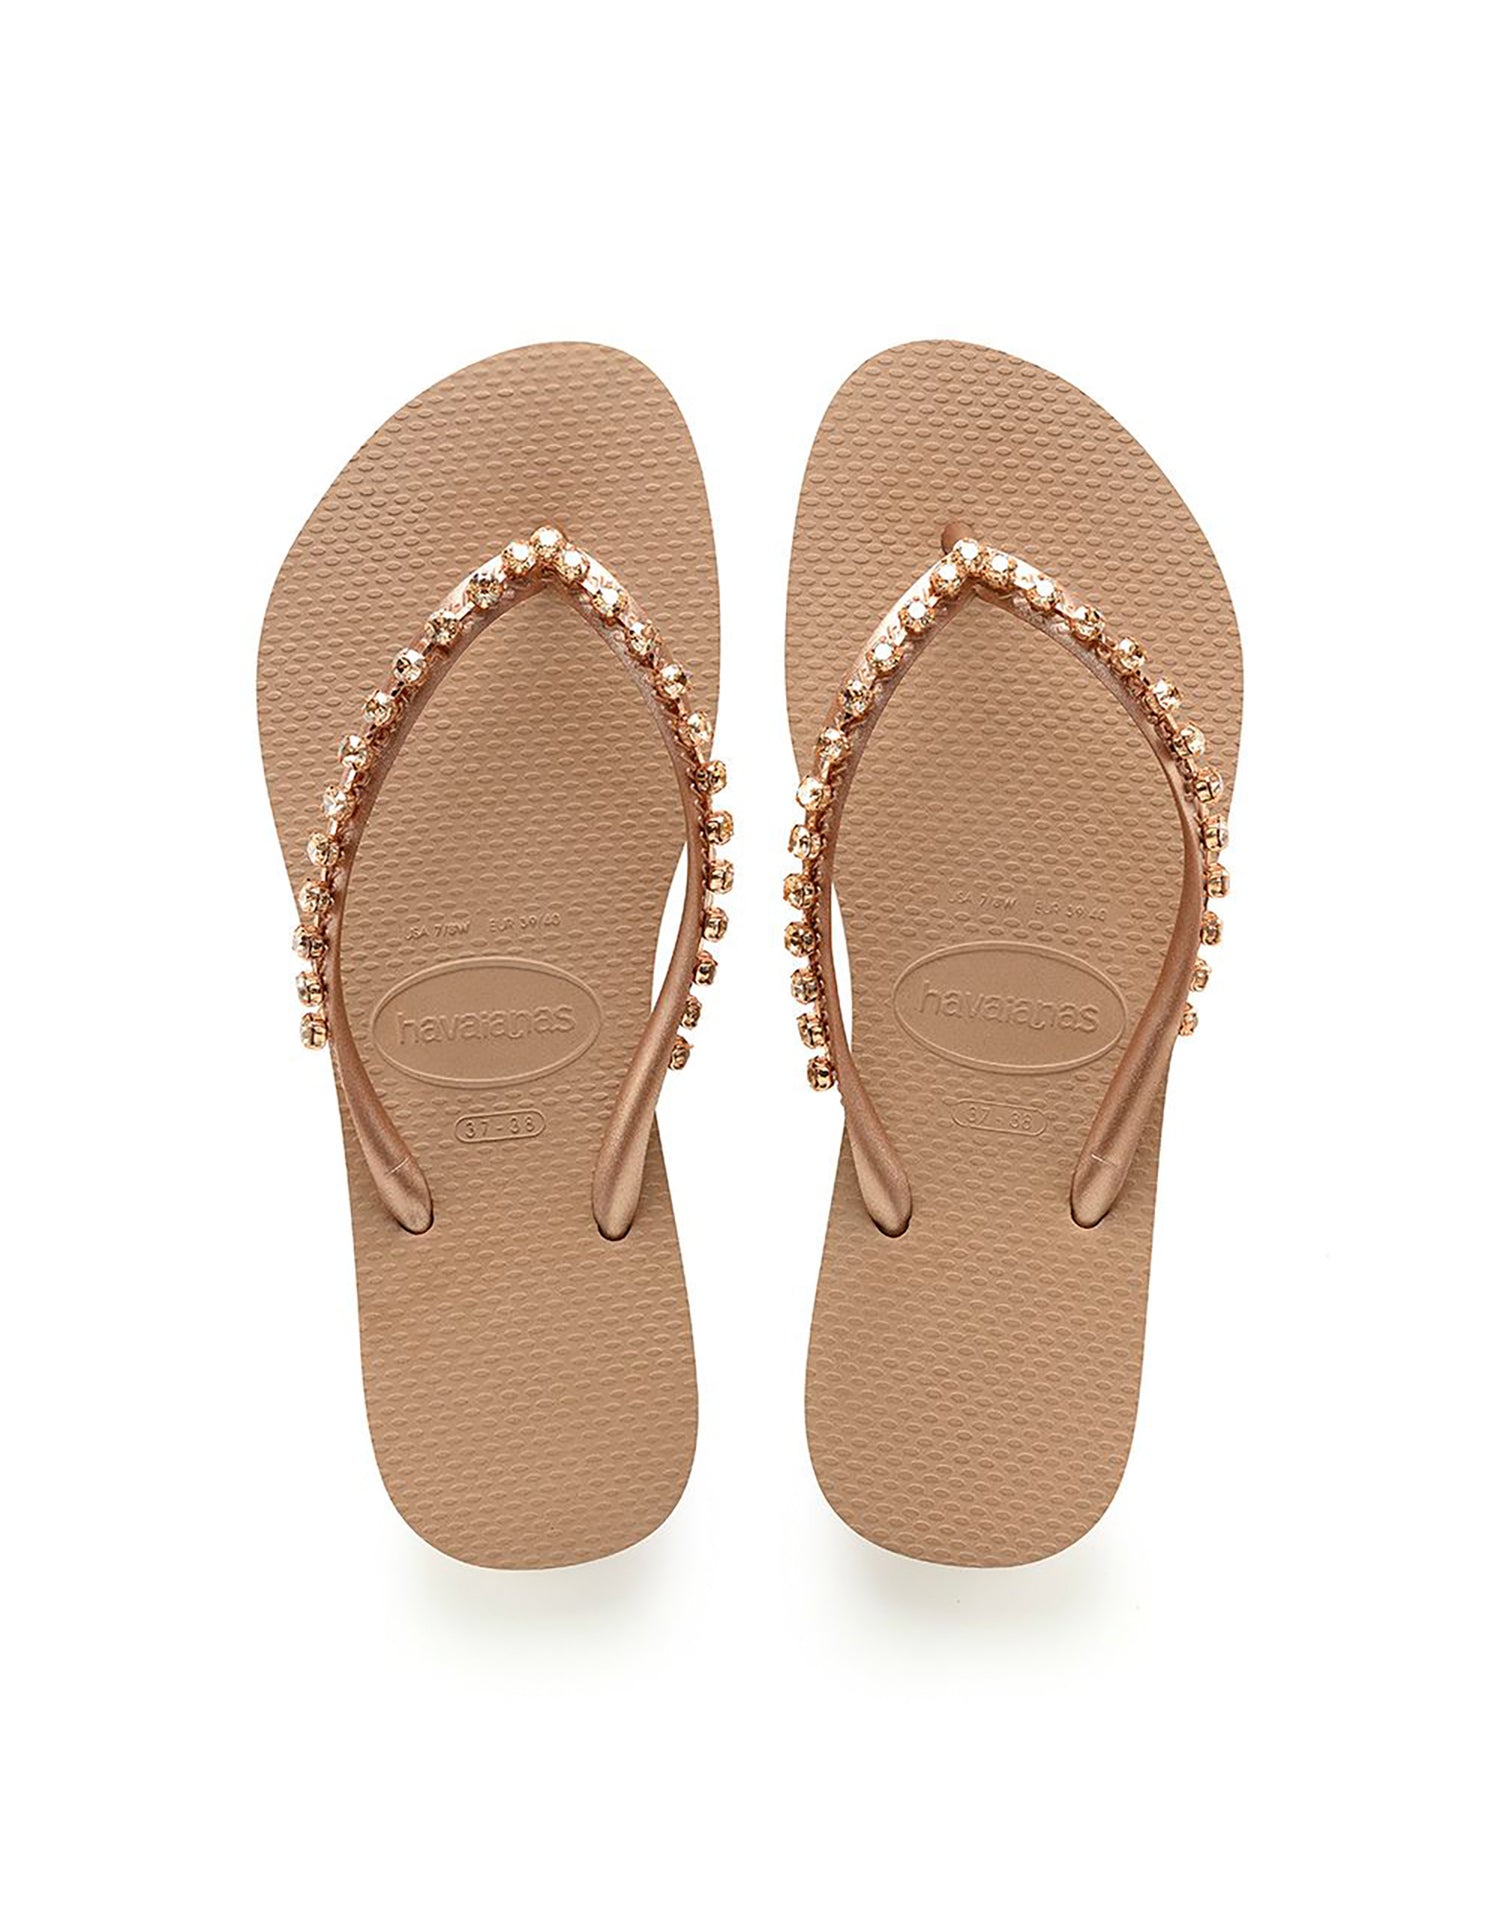 Slim Rock Mesh Sandal by Havaianas in Rose Gold - Front View